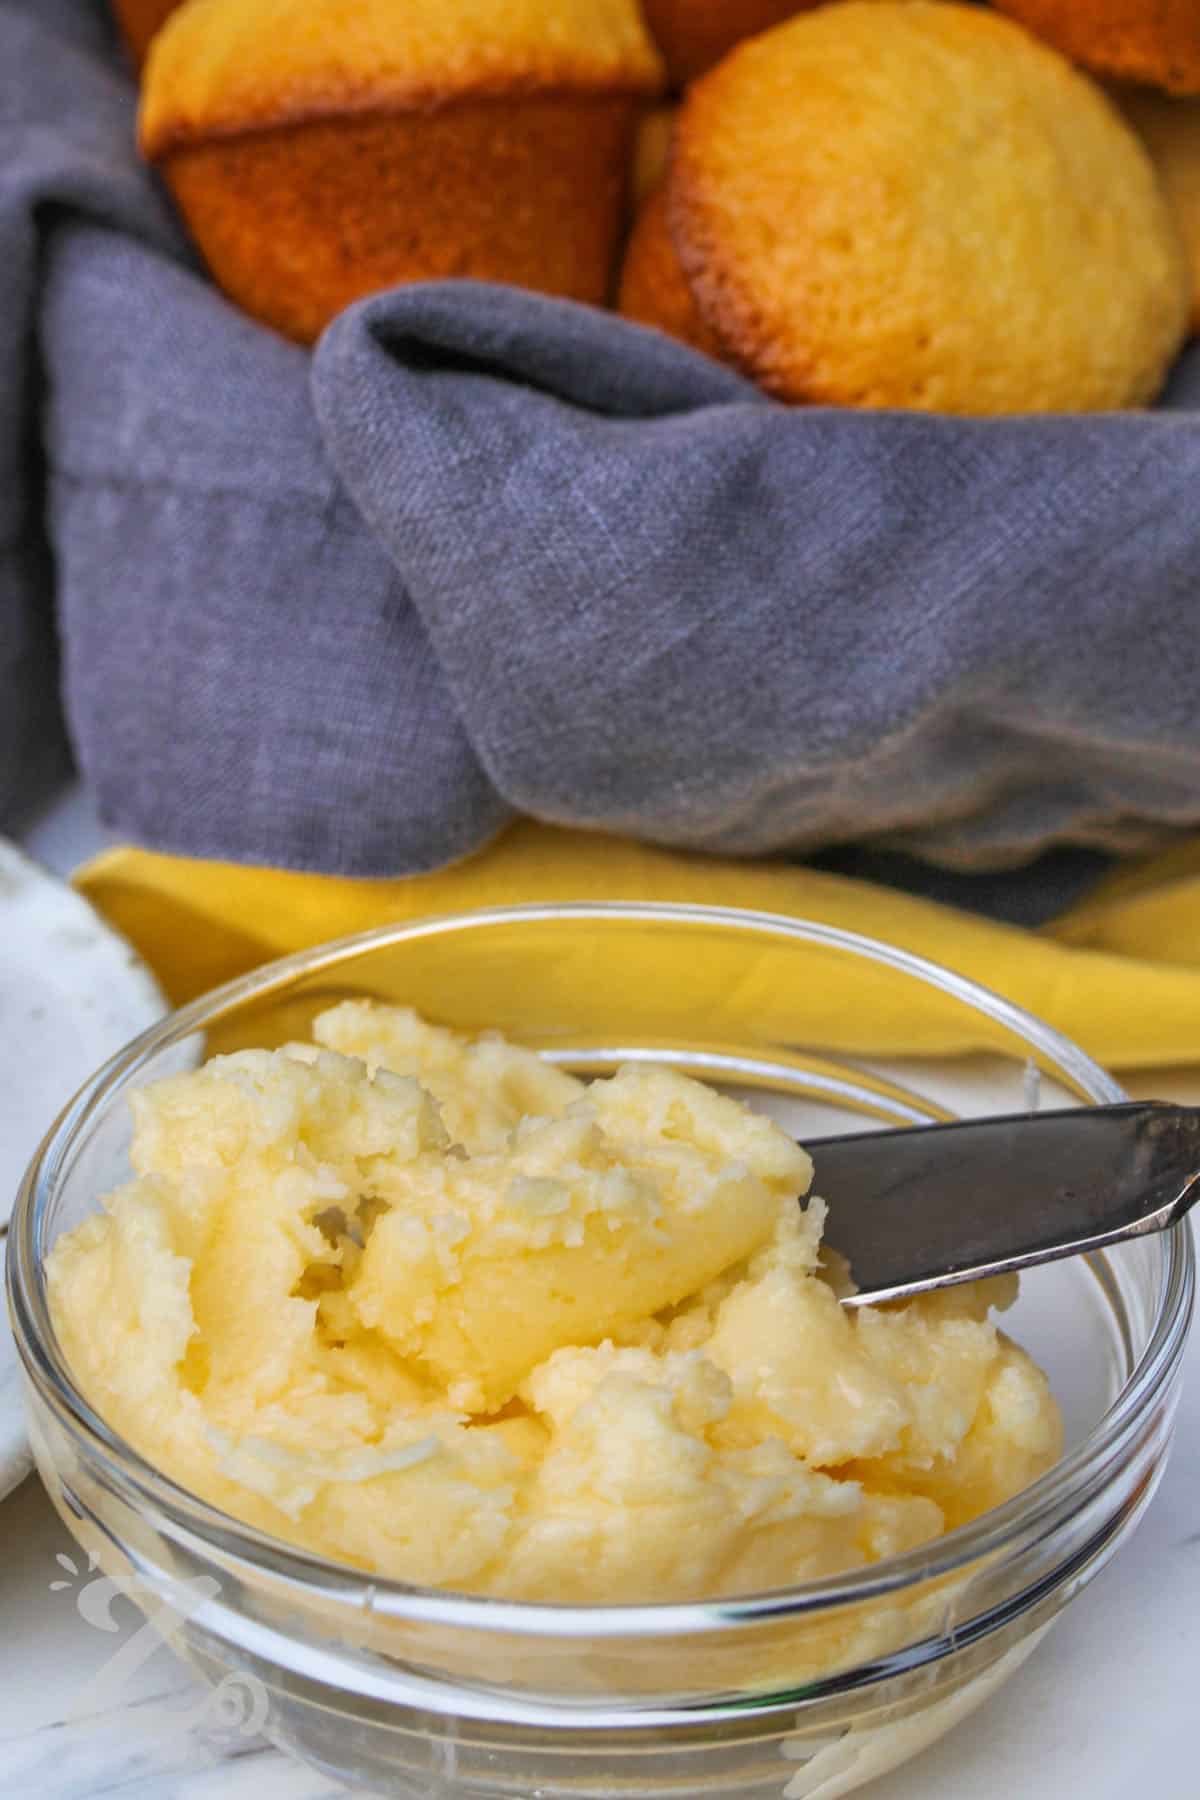 Honey Butter in a bowl with a basket of muffins